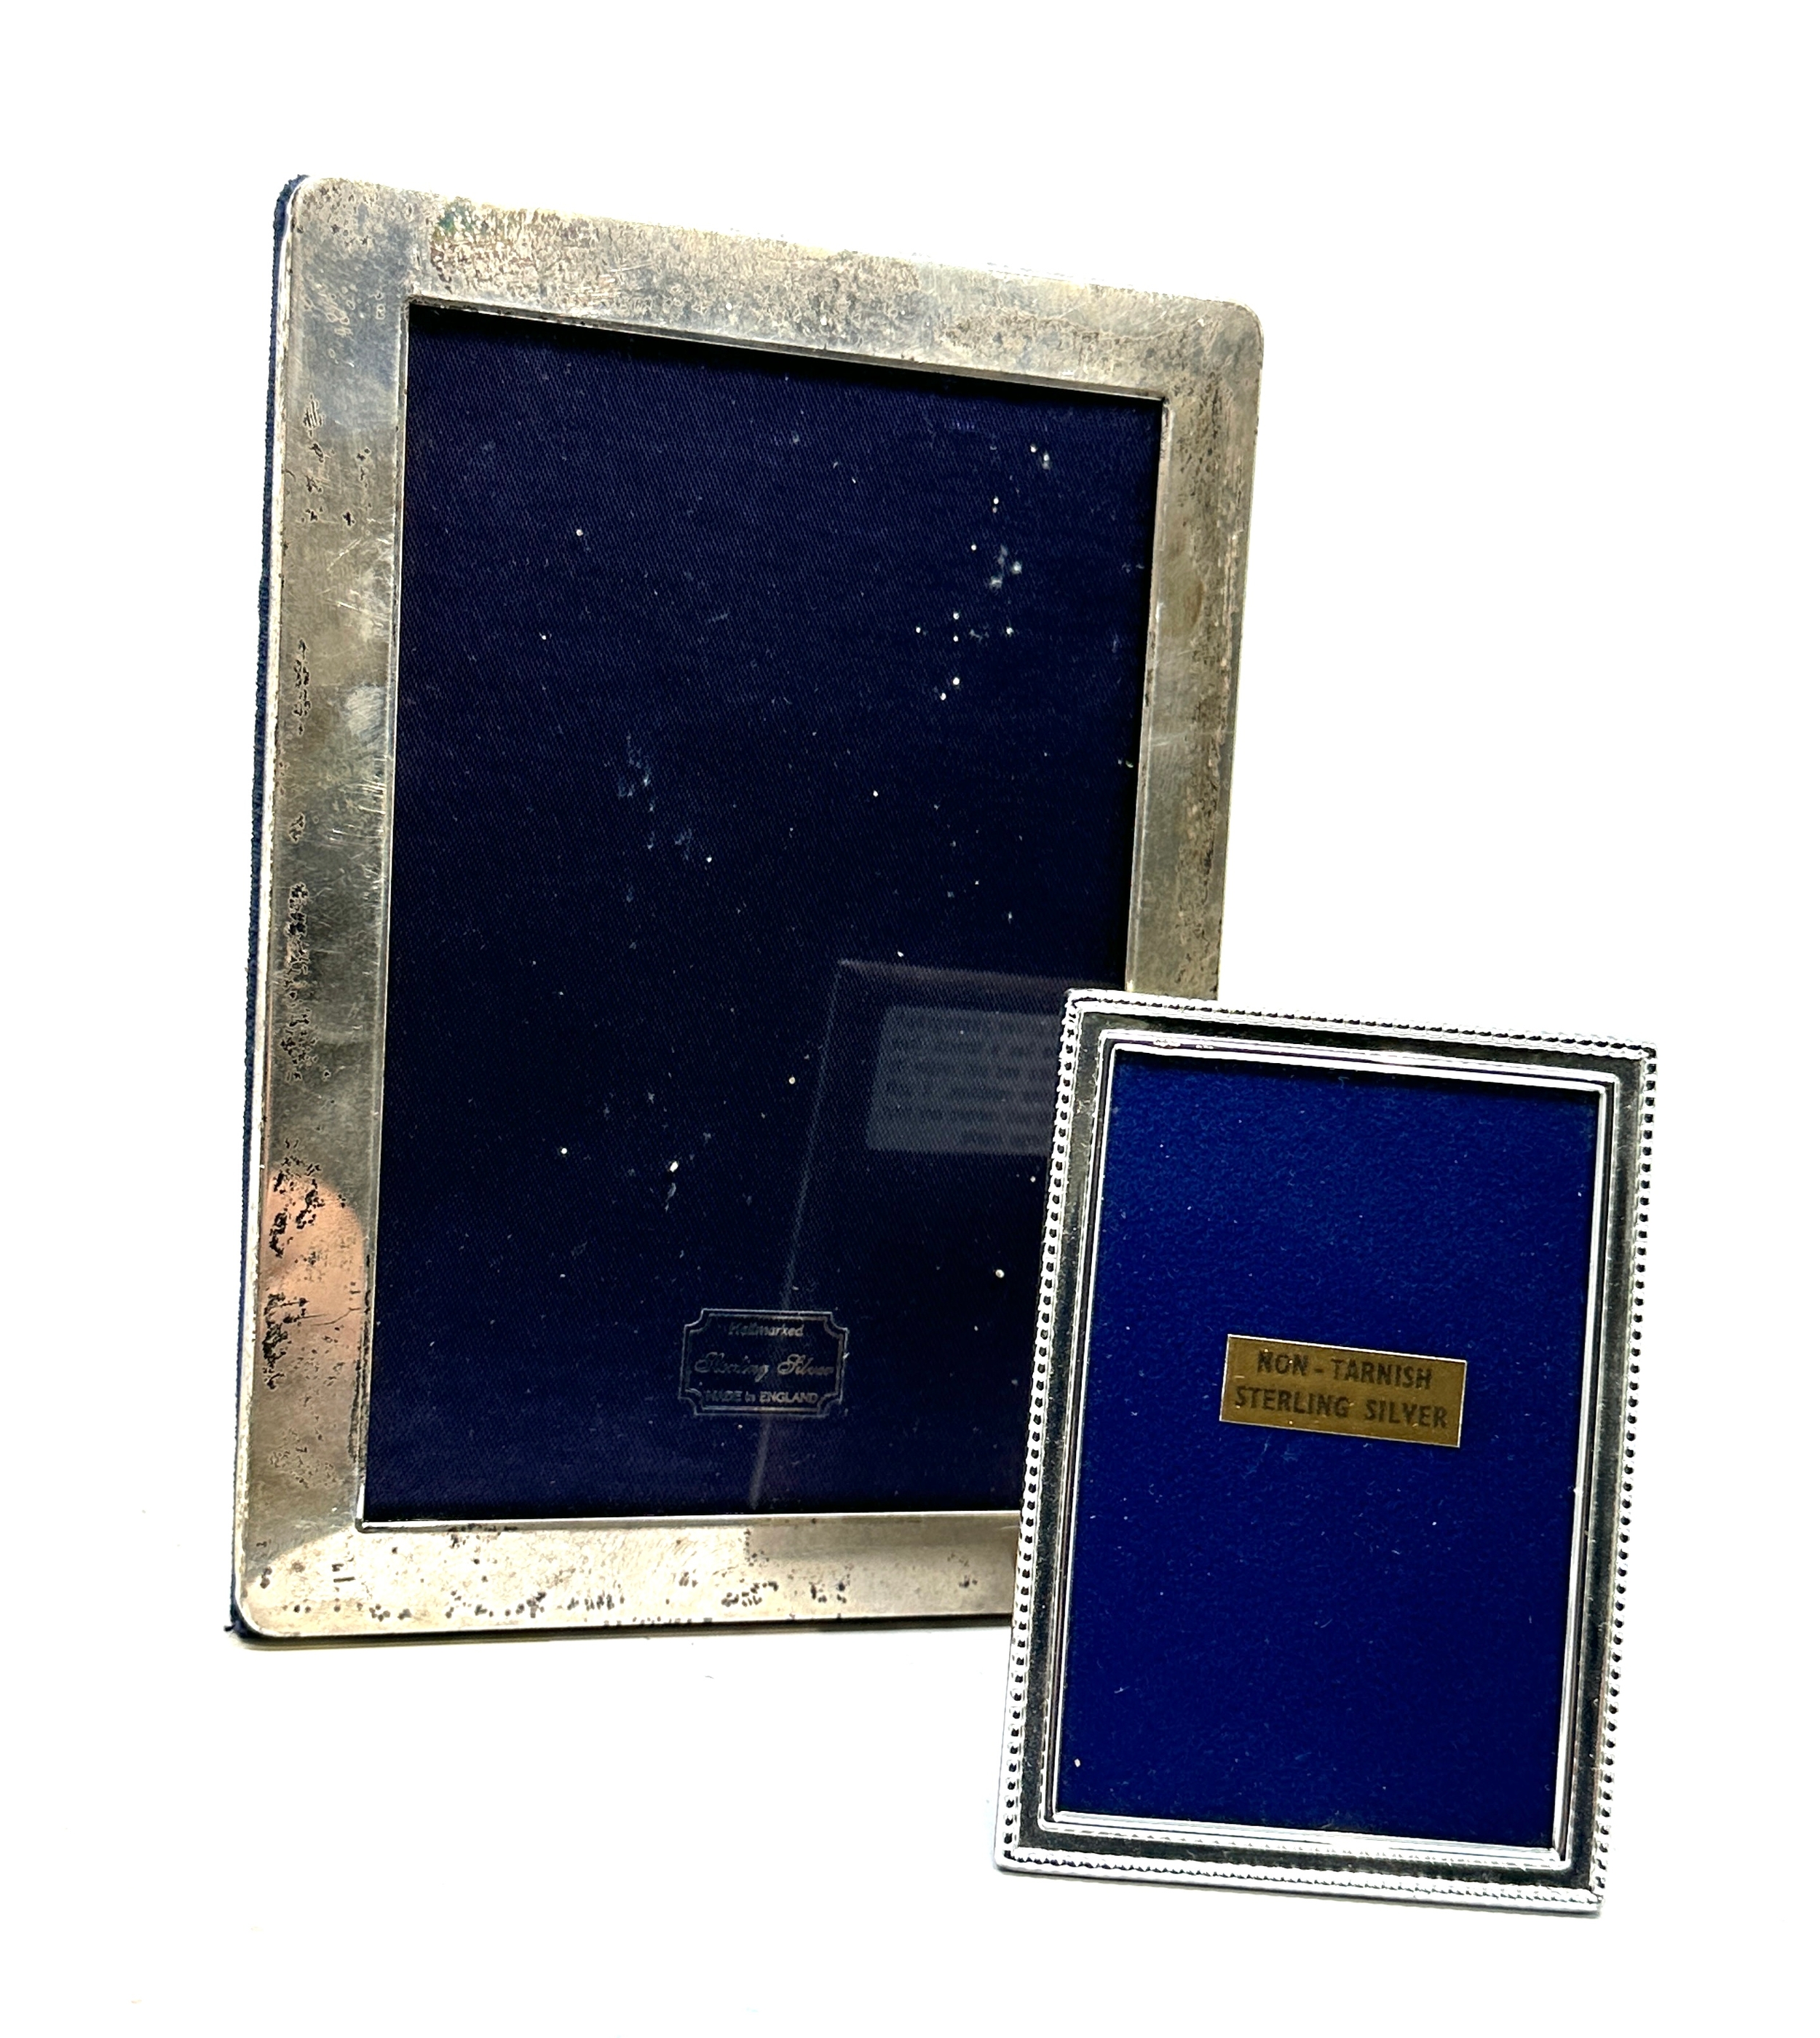 2 silver picture frames largest measures approx 18cm by 13cm